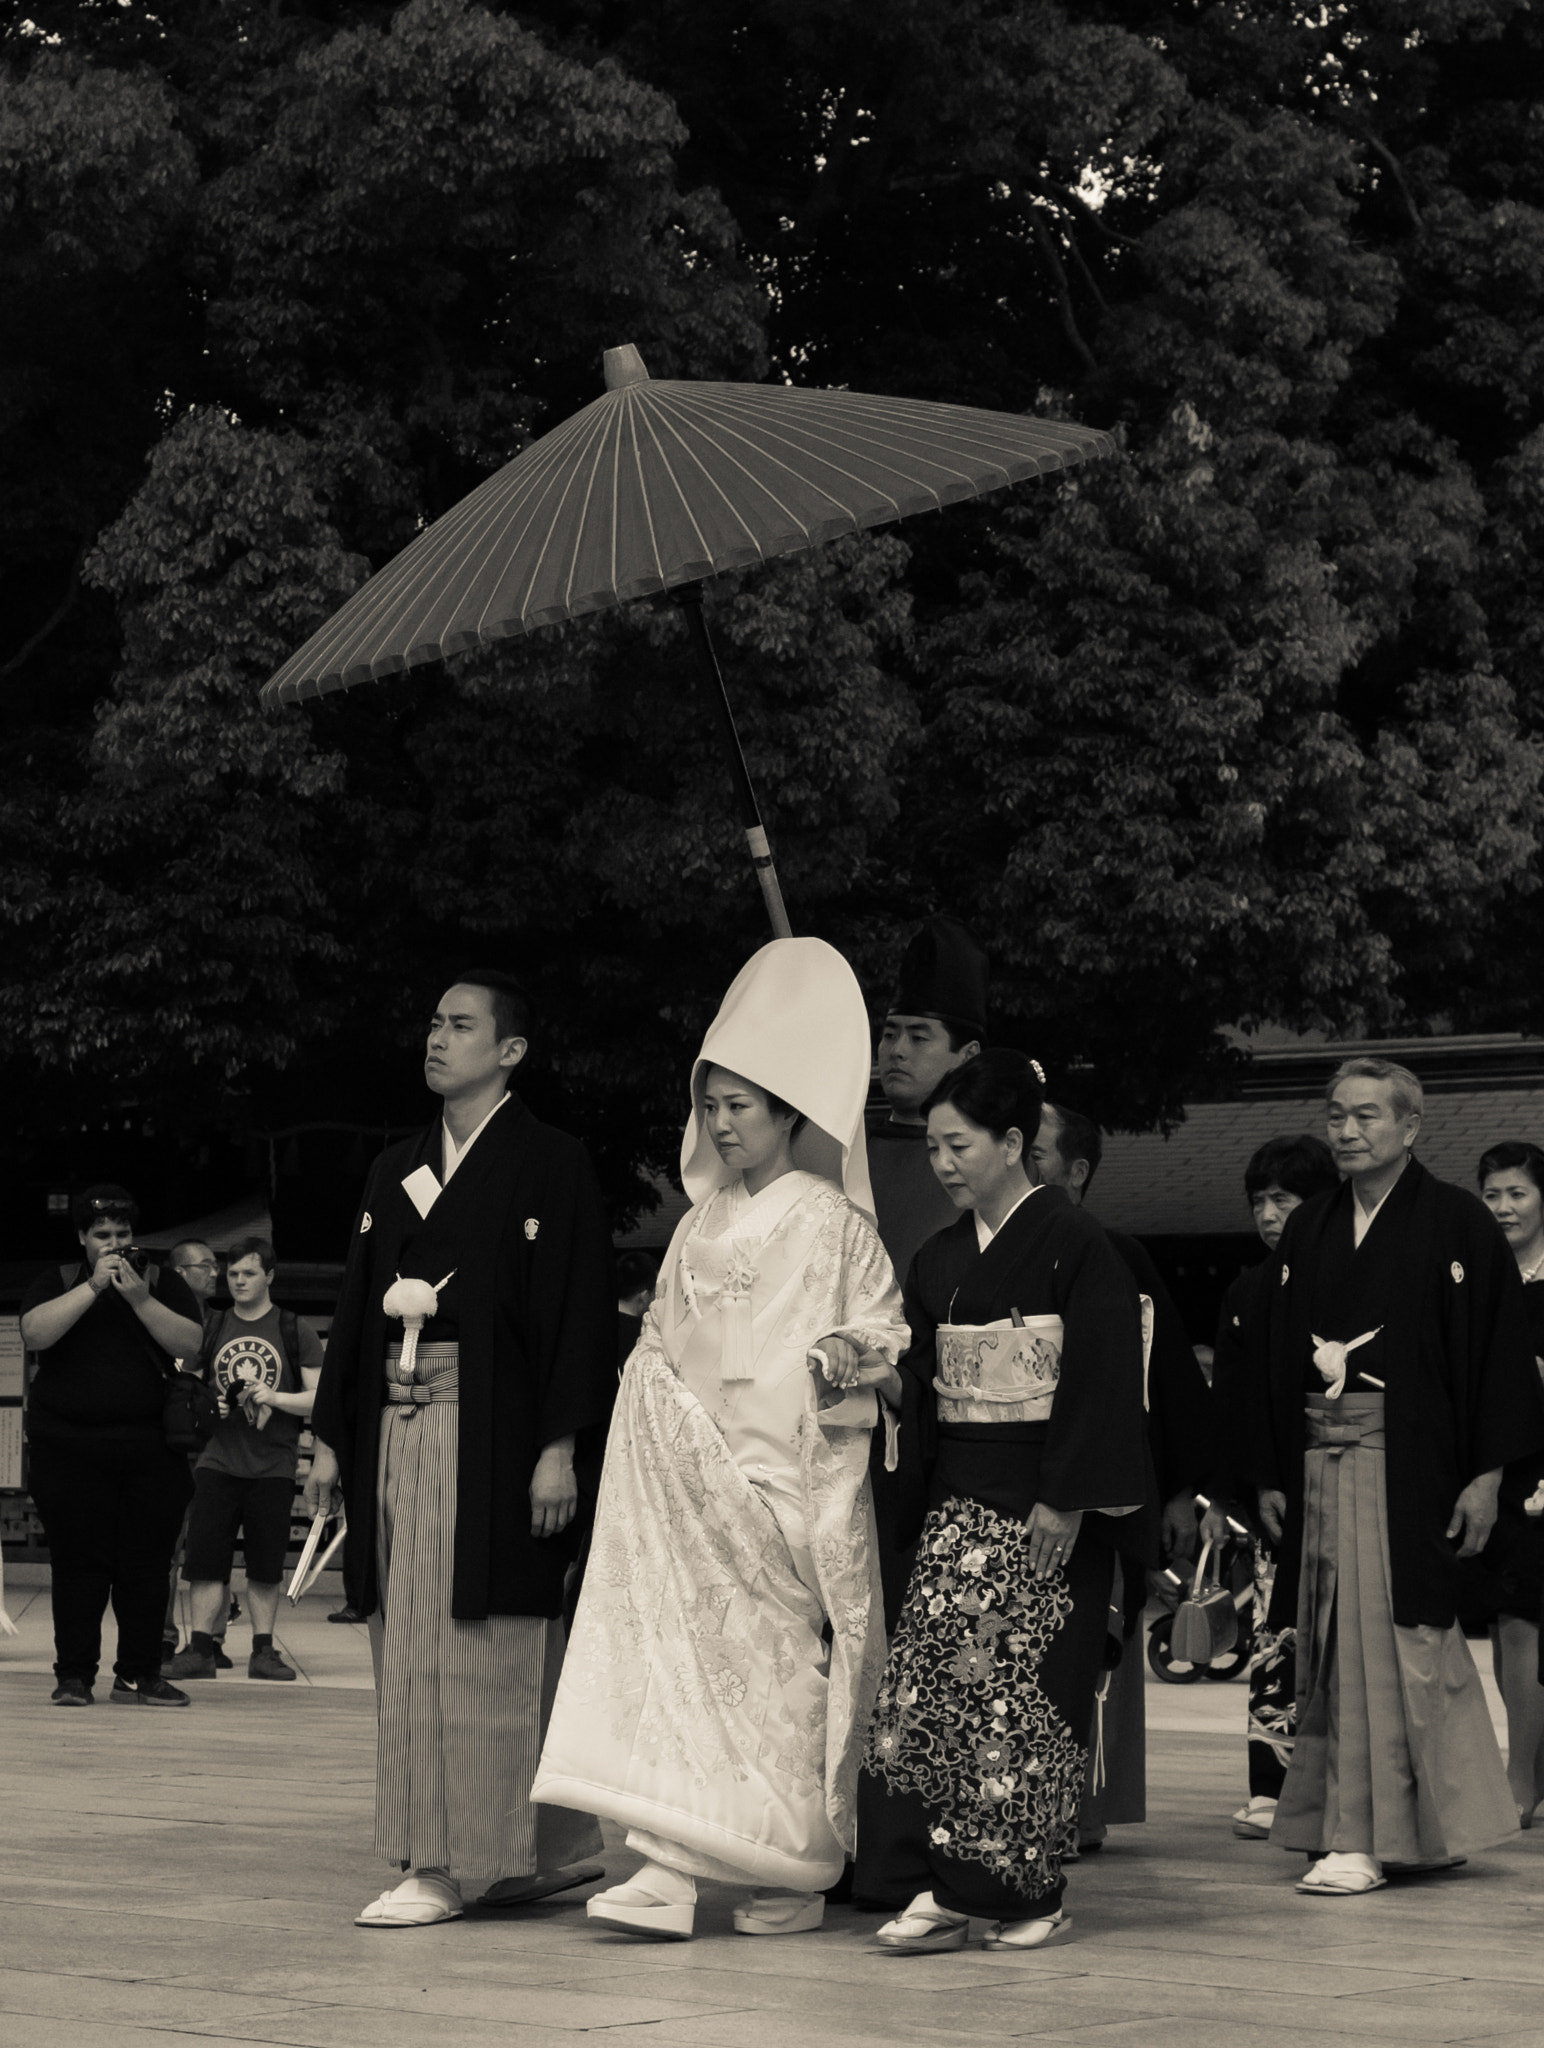 ZEISS Distagon T* 35mm F2 sample photo. Wedding procession photography